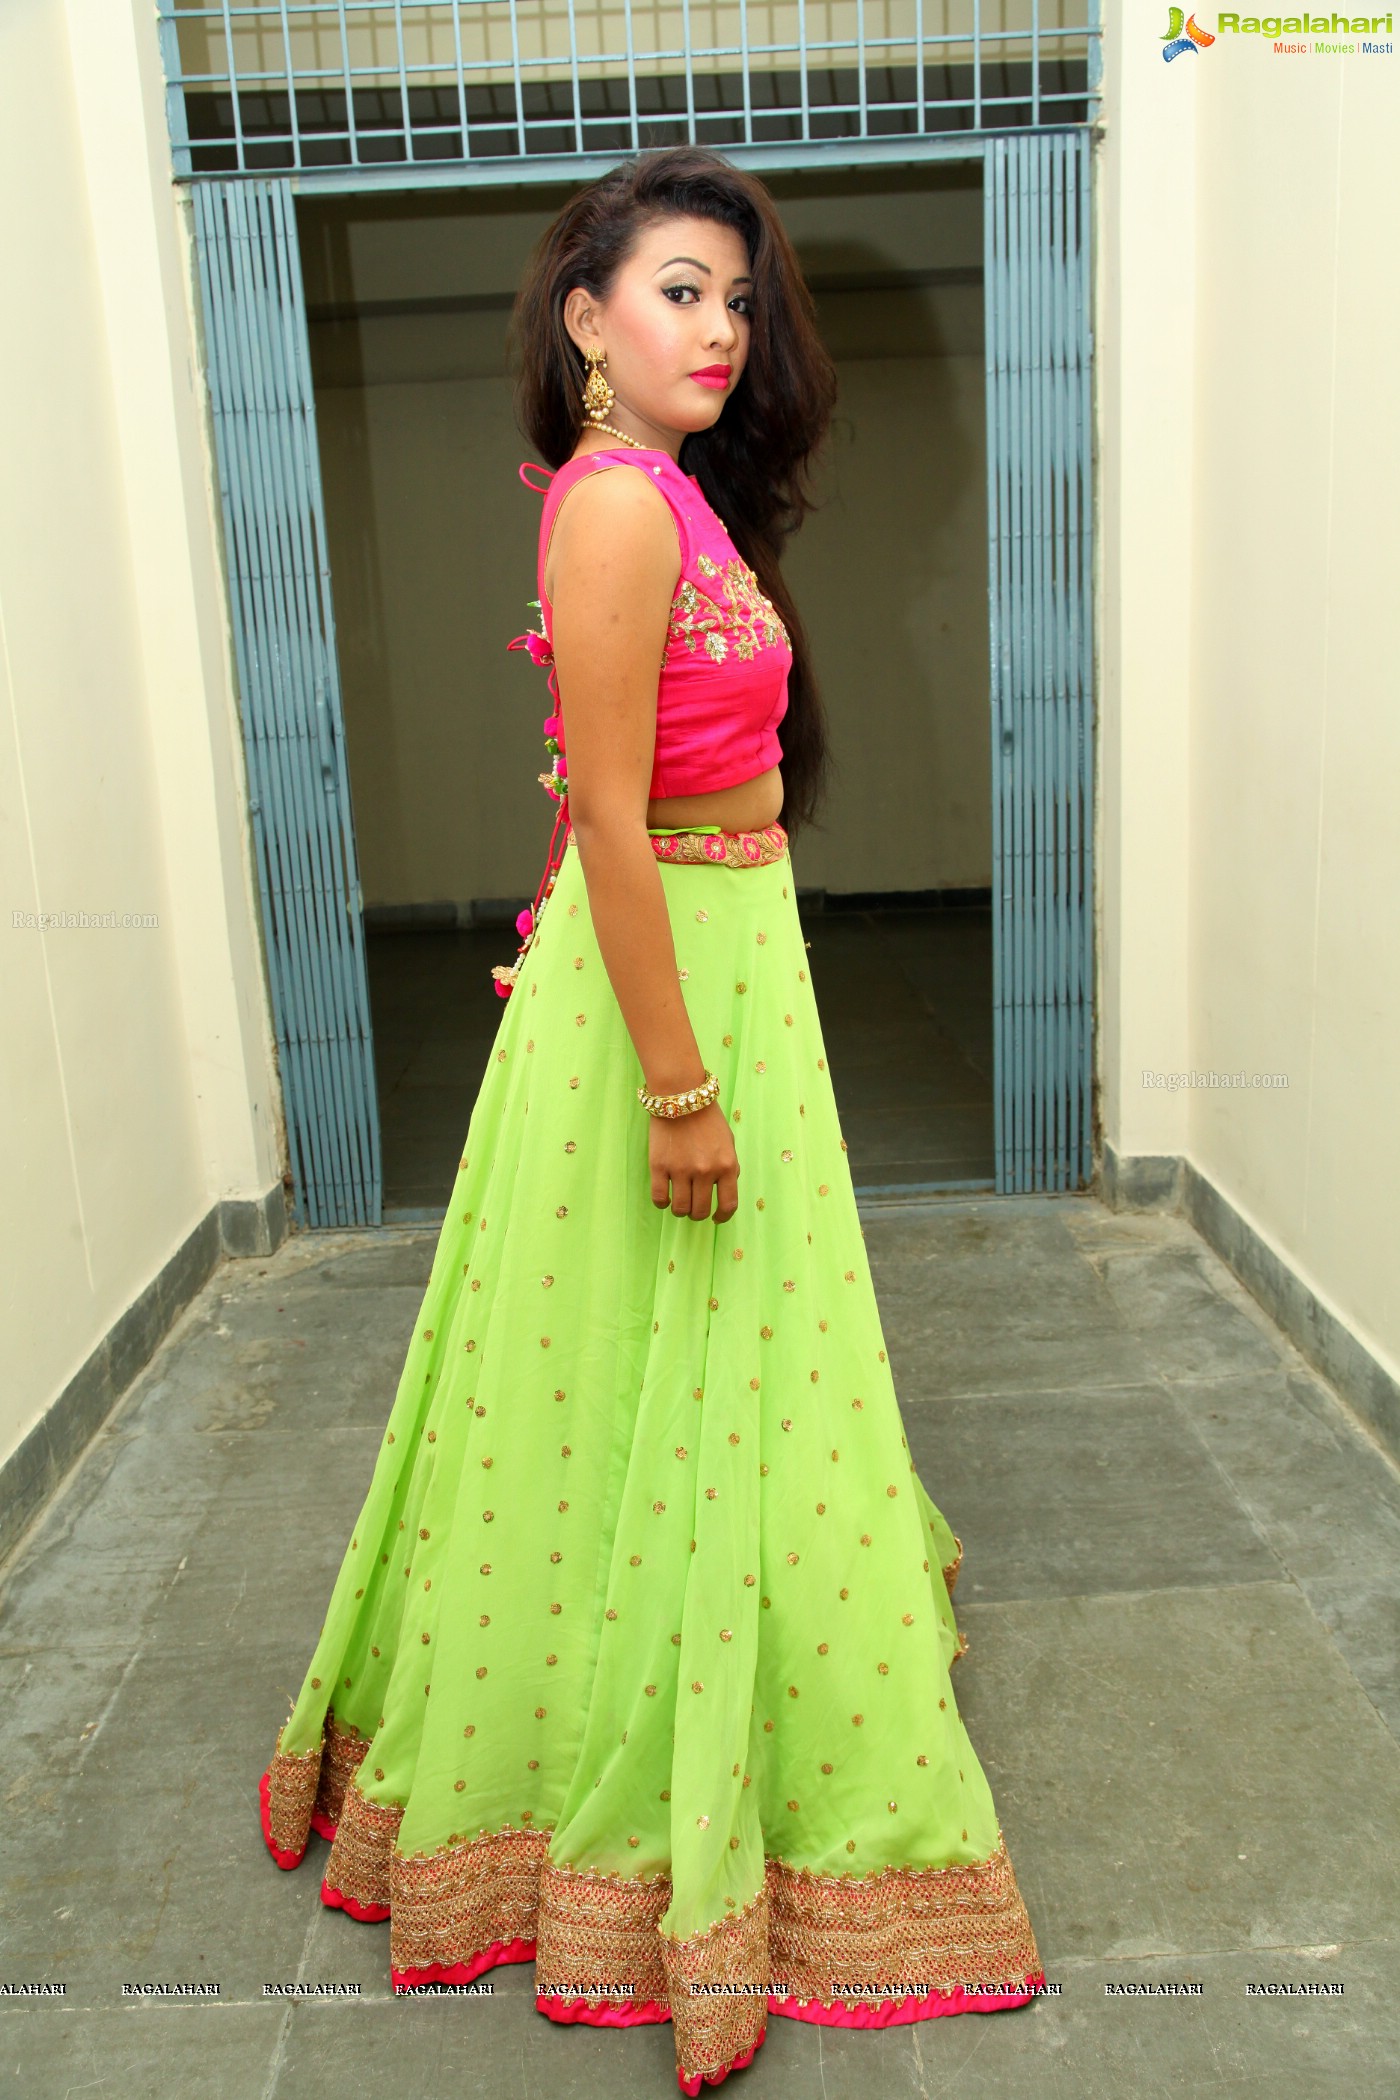 Kavitha at Ms. and Mr Tehzeed Grand Finale (Posters)